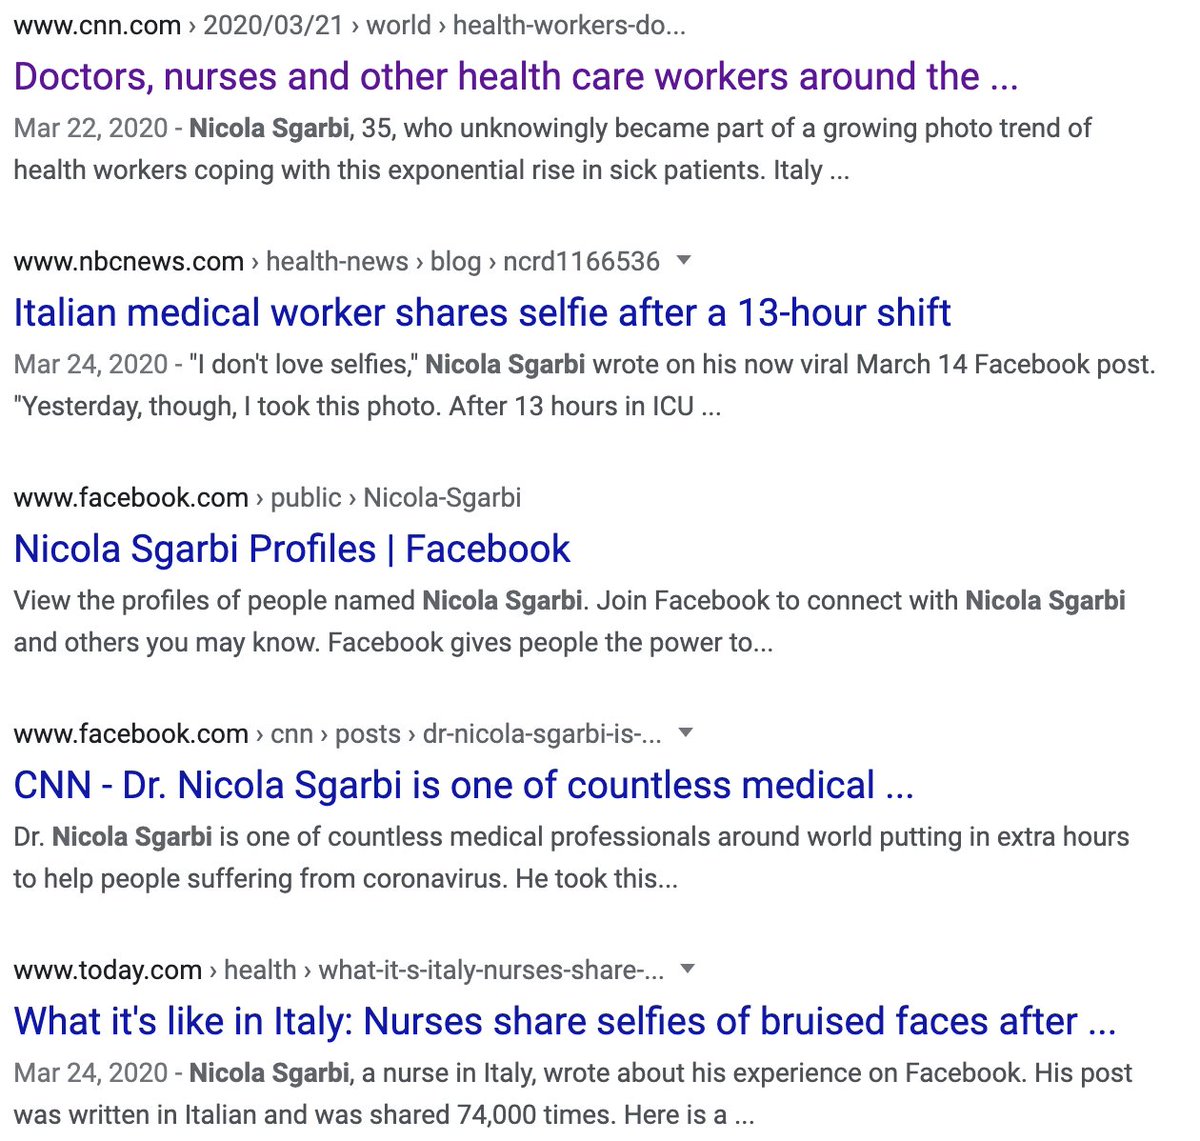 However, this photo in the article and tweet is embedded directly from the Facebook account of Nicola Sgarbi. A google search of his name tells us he’s an Italian doctor whose photo has been circulating among other healthcare workers’ who are fighting coronavirus.